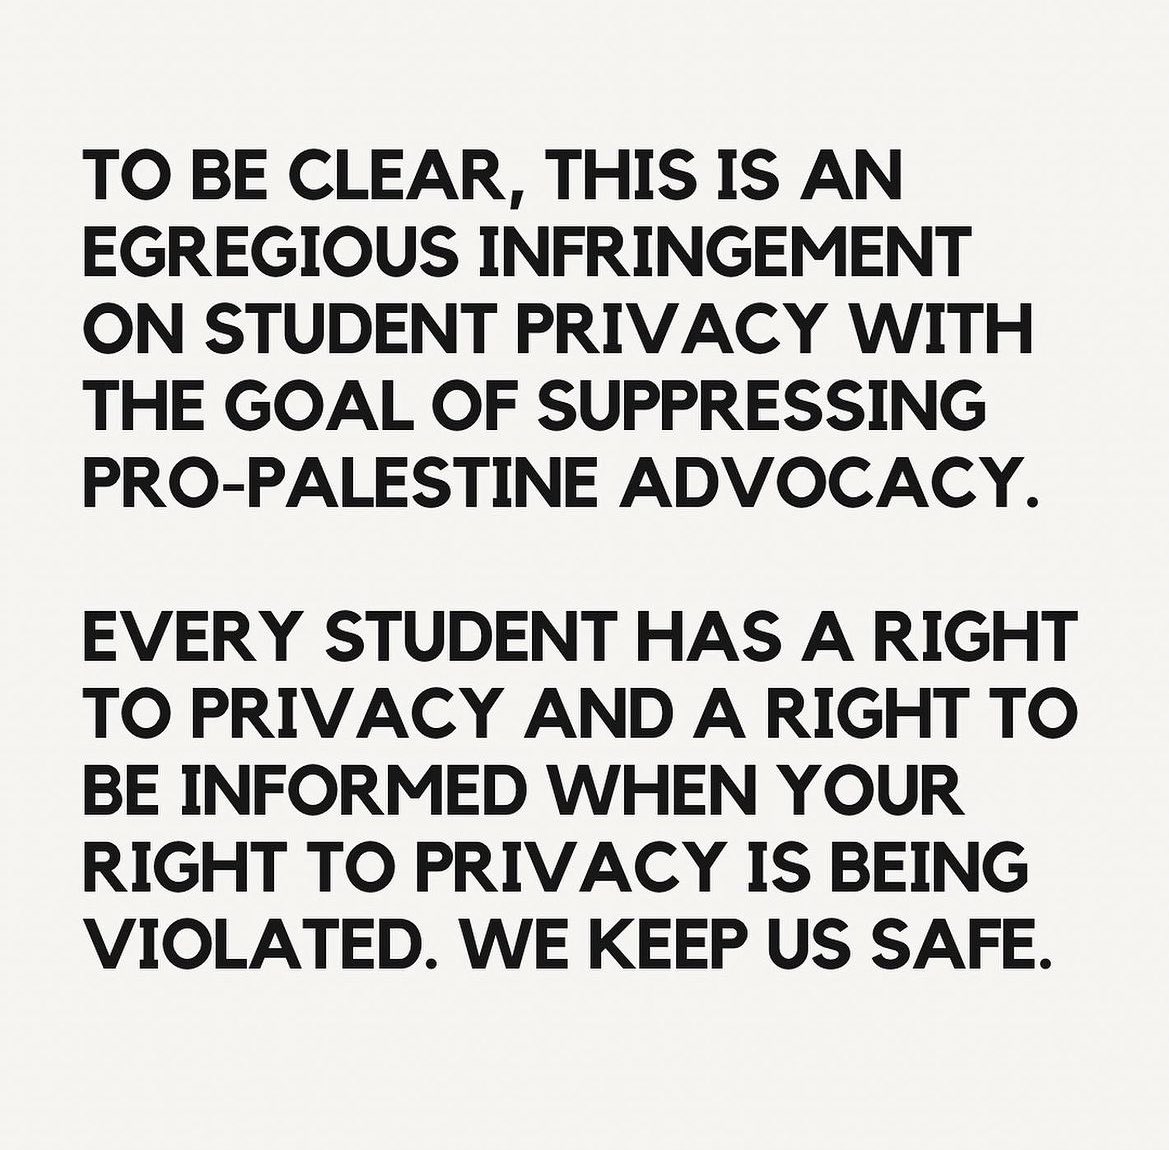 BREAKING: Columbia University wifi and services are being surveilled to provide evidence for a house committee investigation. Students were not warned about this privacy violation. Do not open any emails/messages you don’t recognize, use a VPN, & download signal.